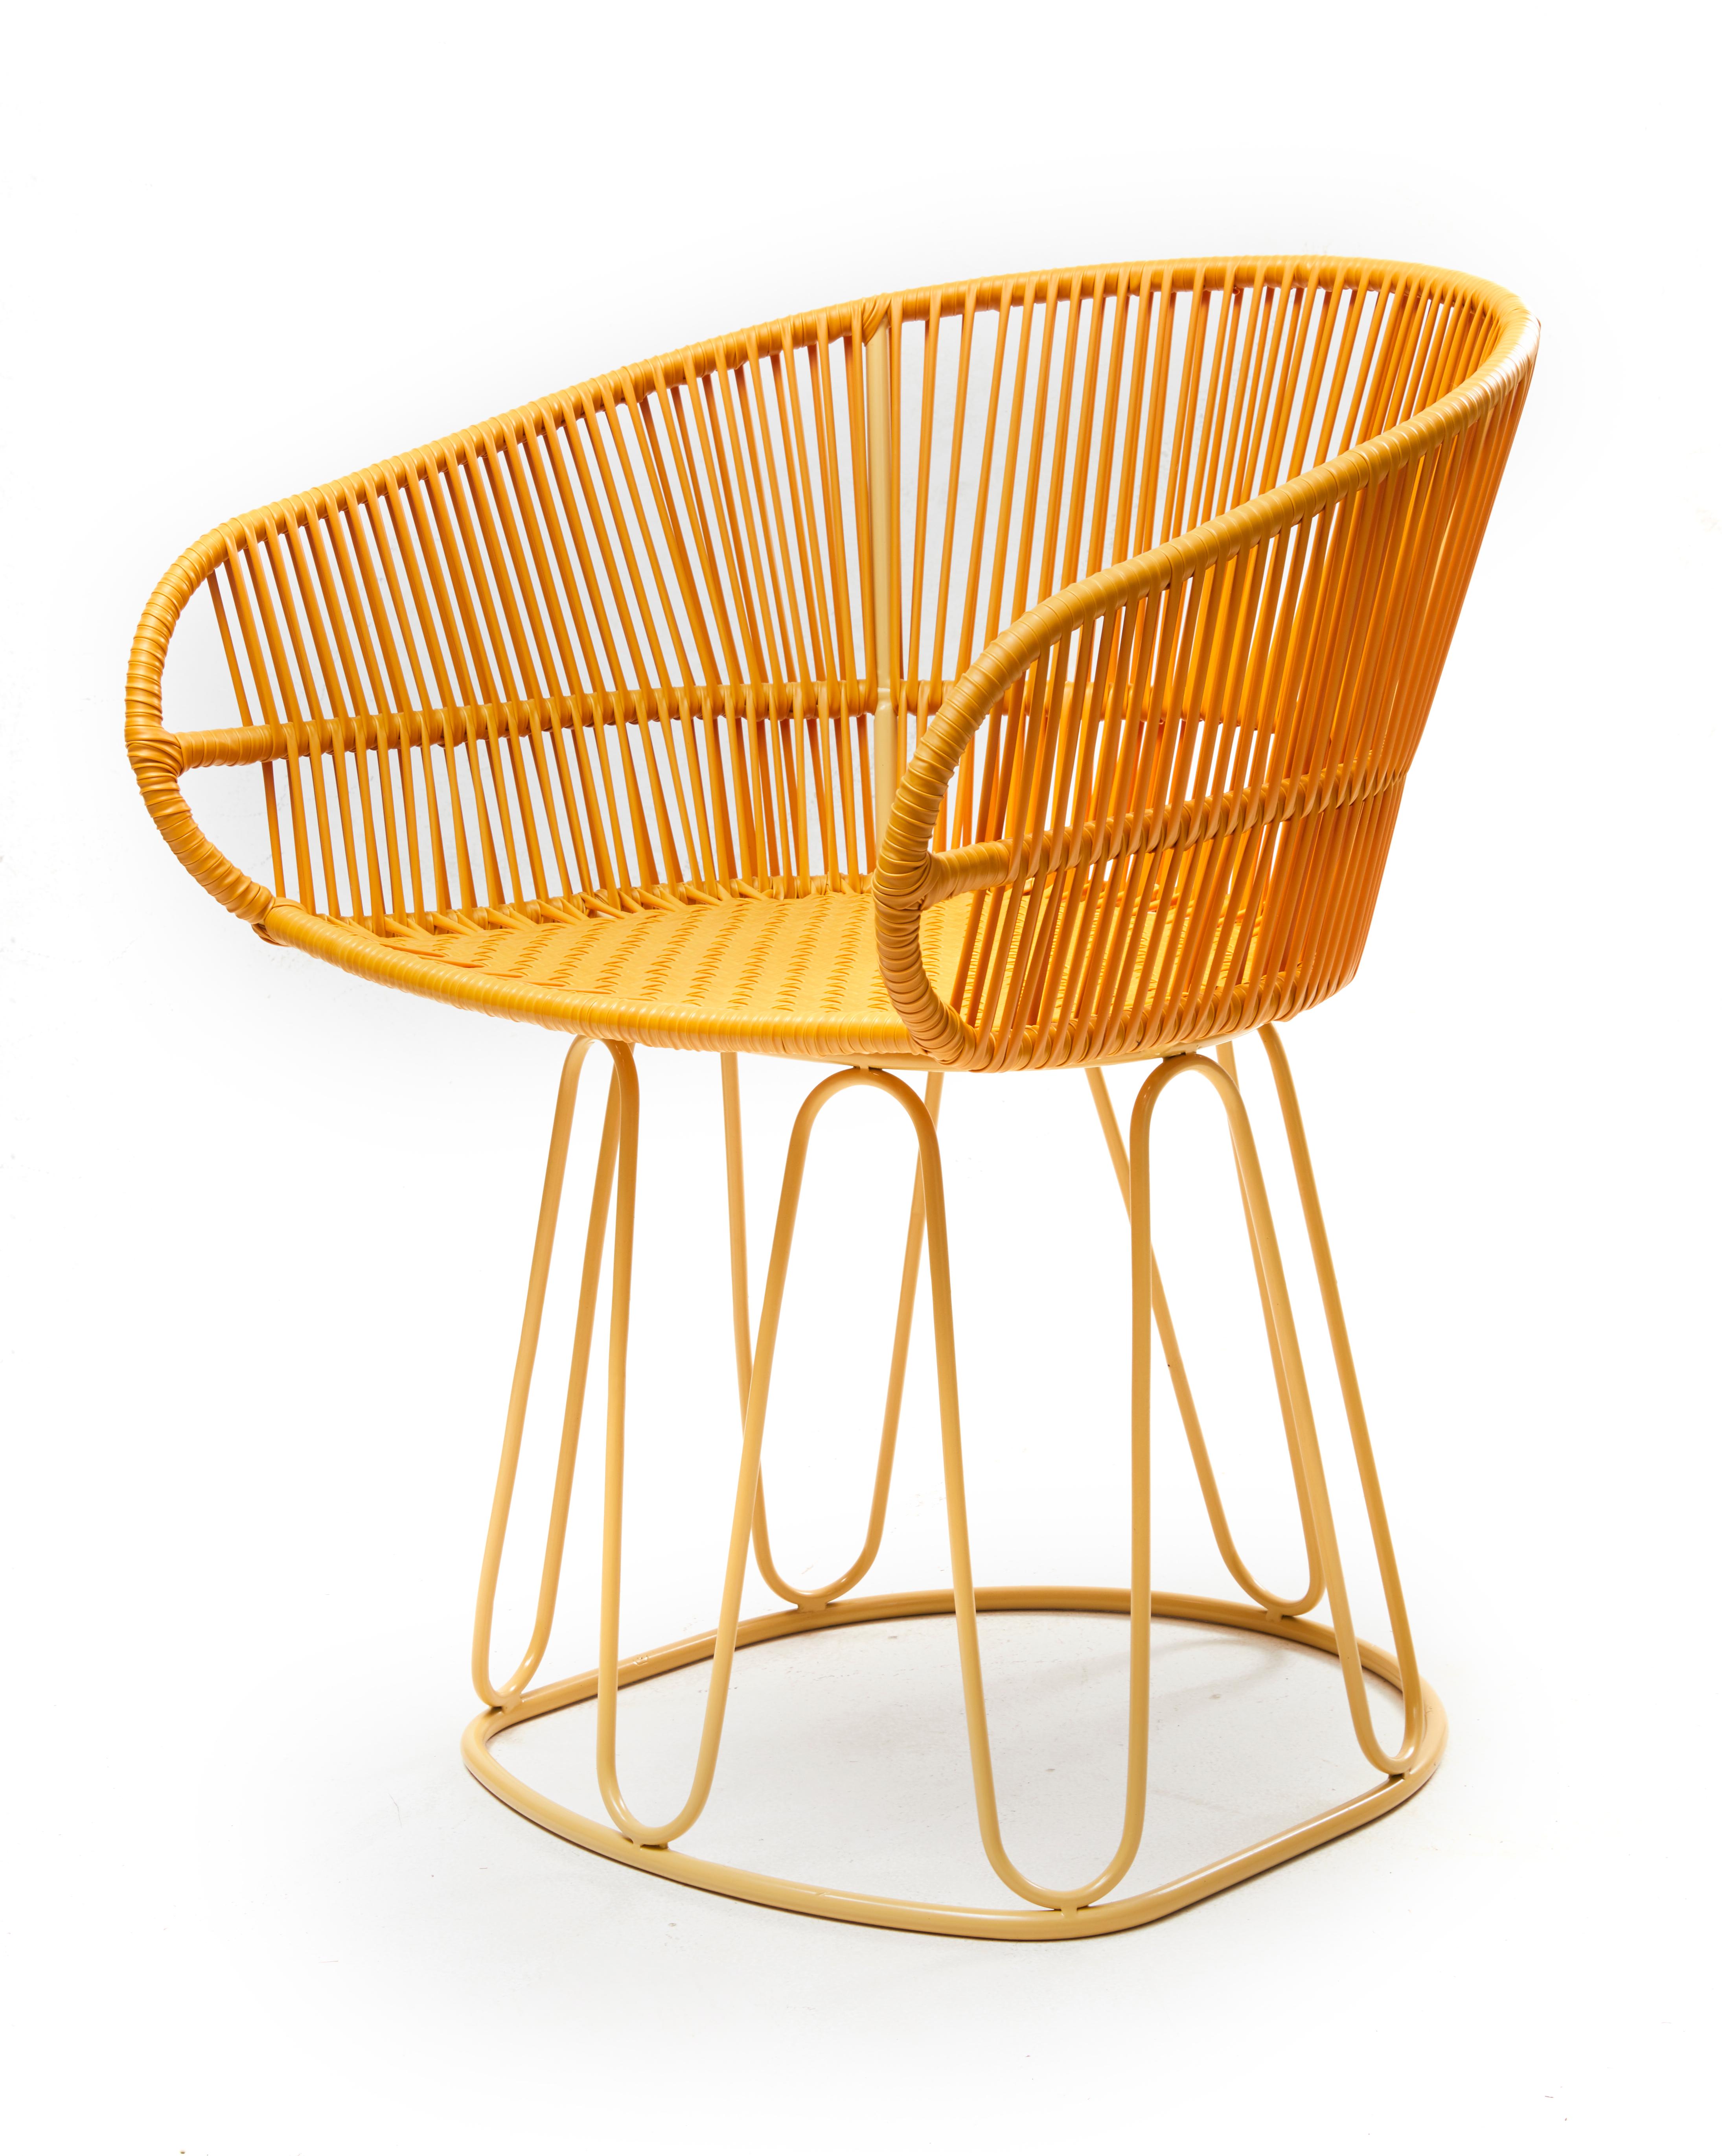 Set of 4 Honey Circo dining chair by Sebastian Herkner
Materials: galvanized and powder-coated tubular steel. PVC strings.
Technique: made from recycled plastic. Weaved by local craftspeople in Colombia. 
Dimensions: W 61.5 x D 56.5 x H 77.5 cm